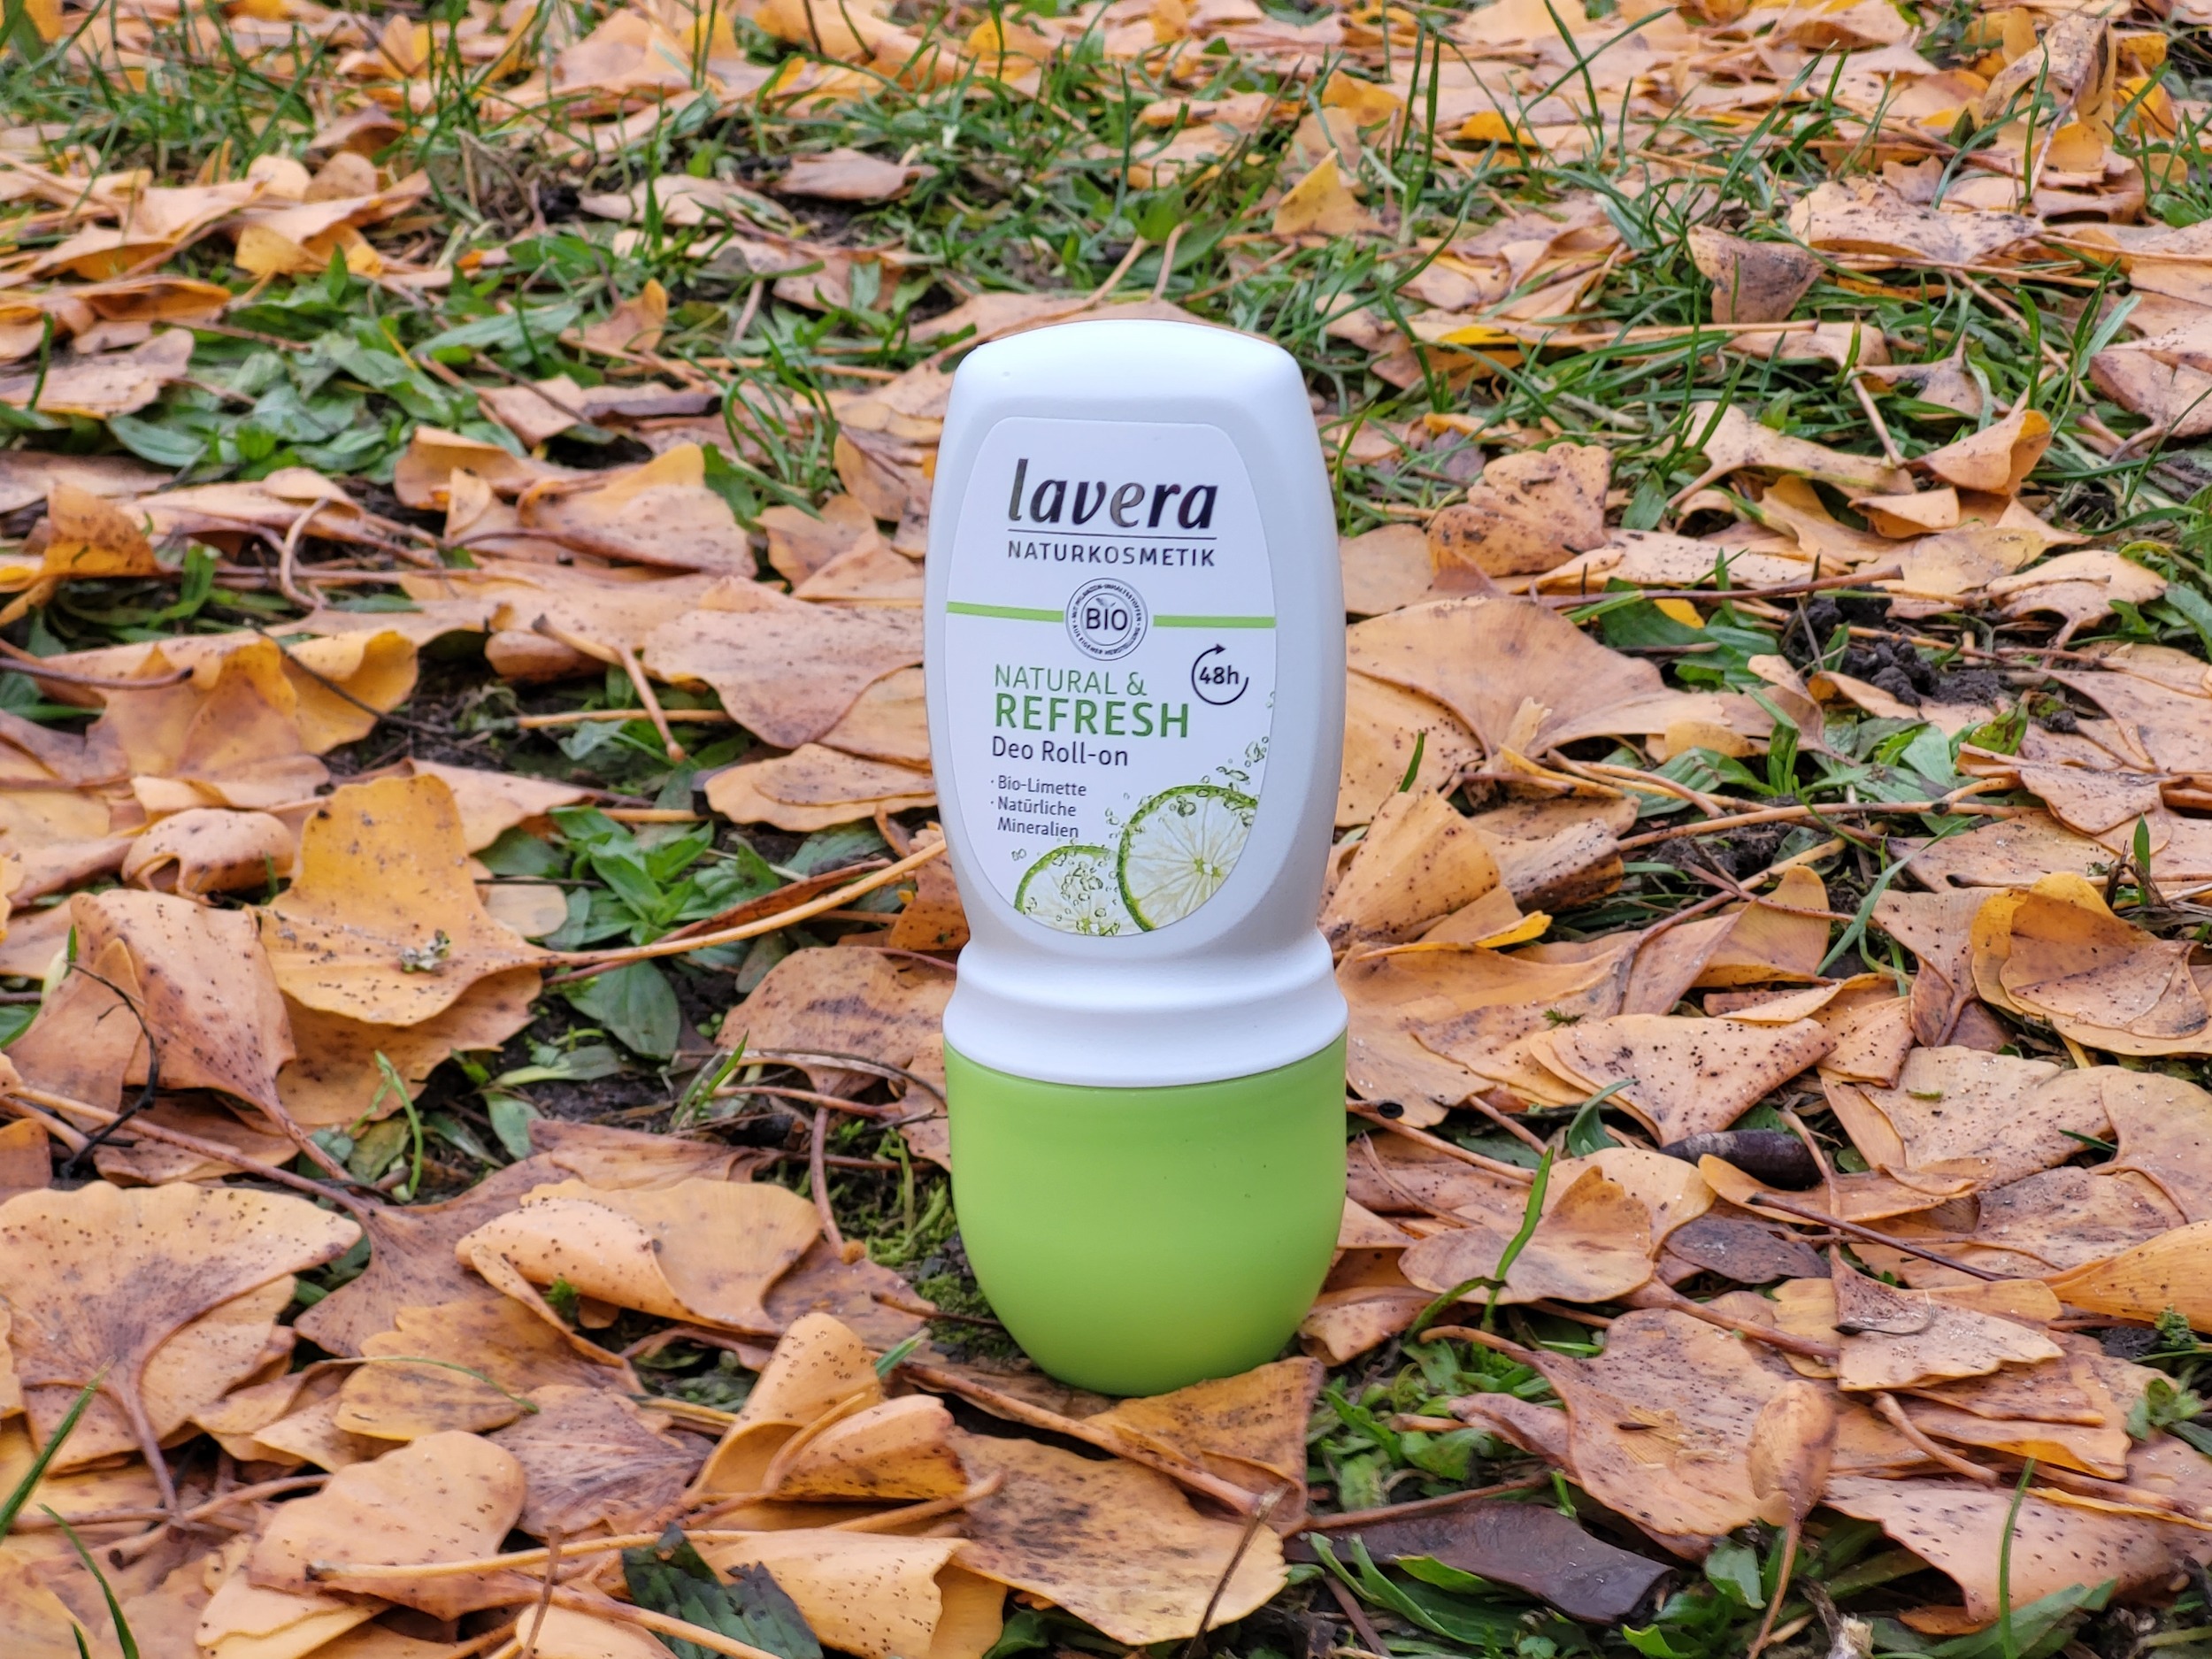 Lavera Deo Roll-on Natural & Refresh im Test